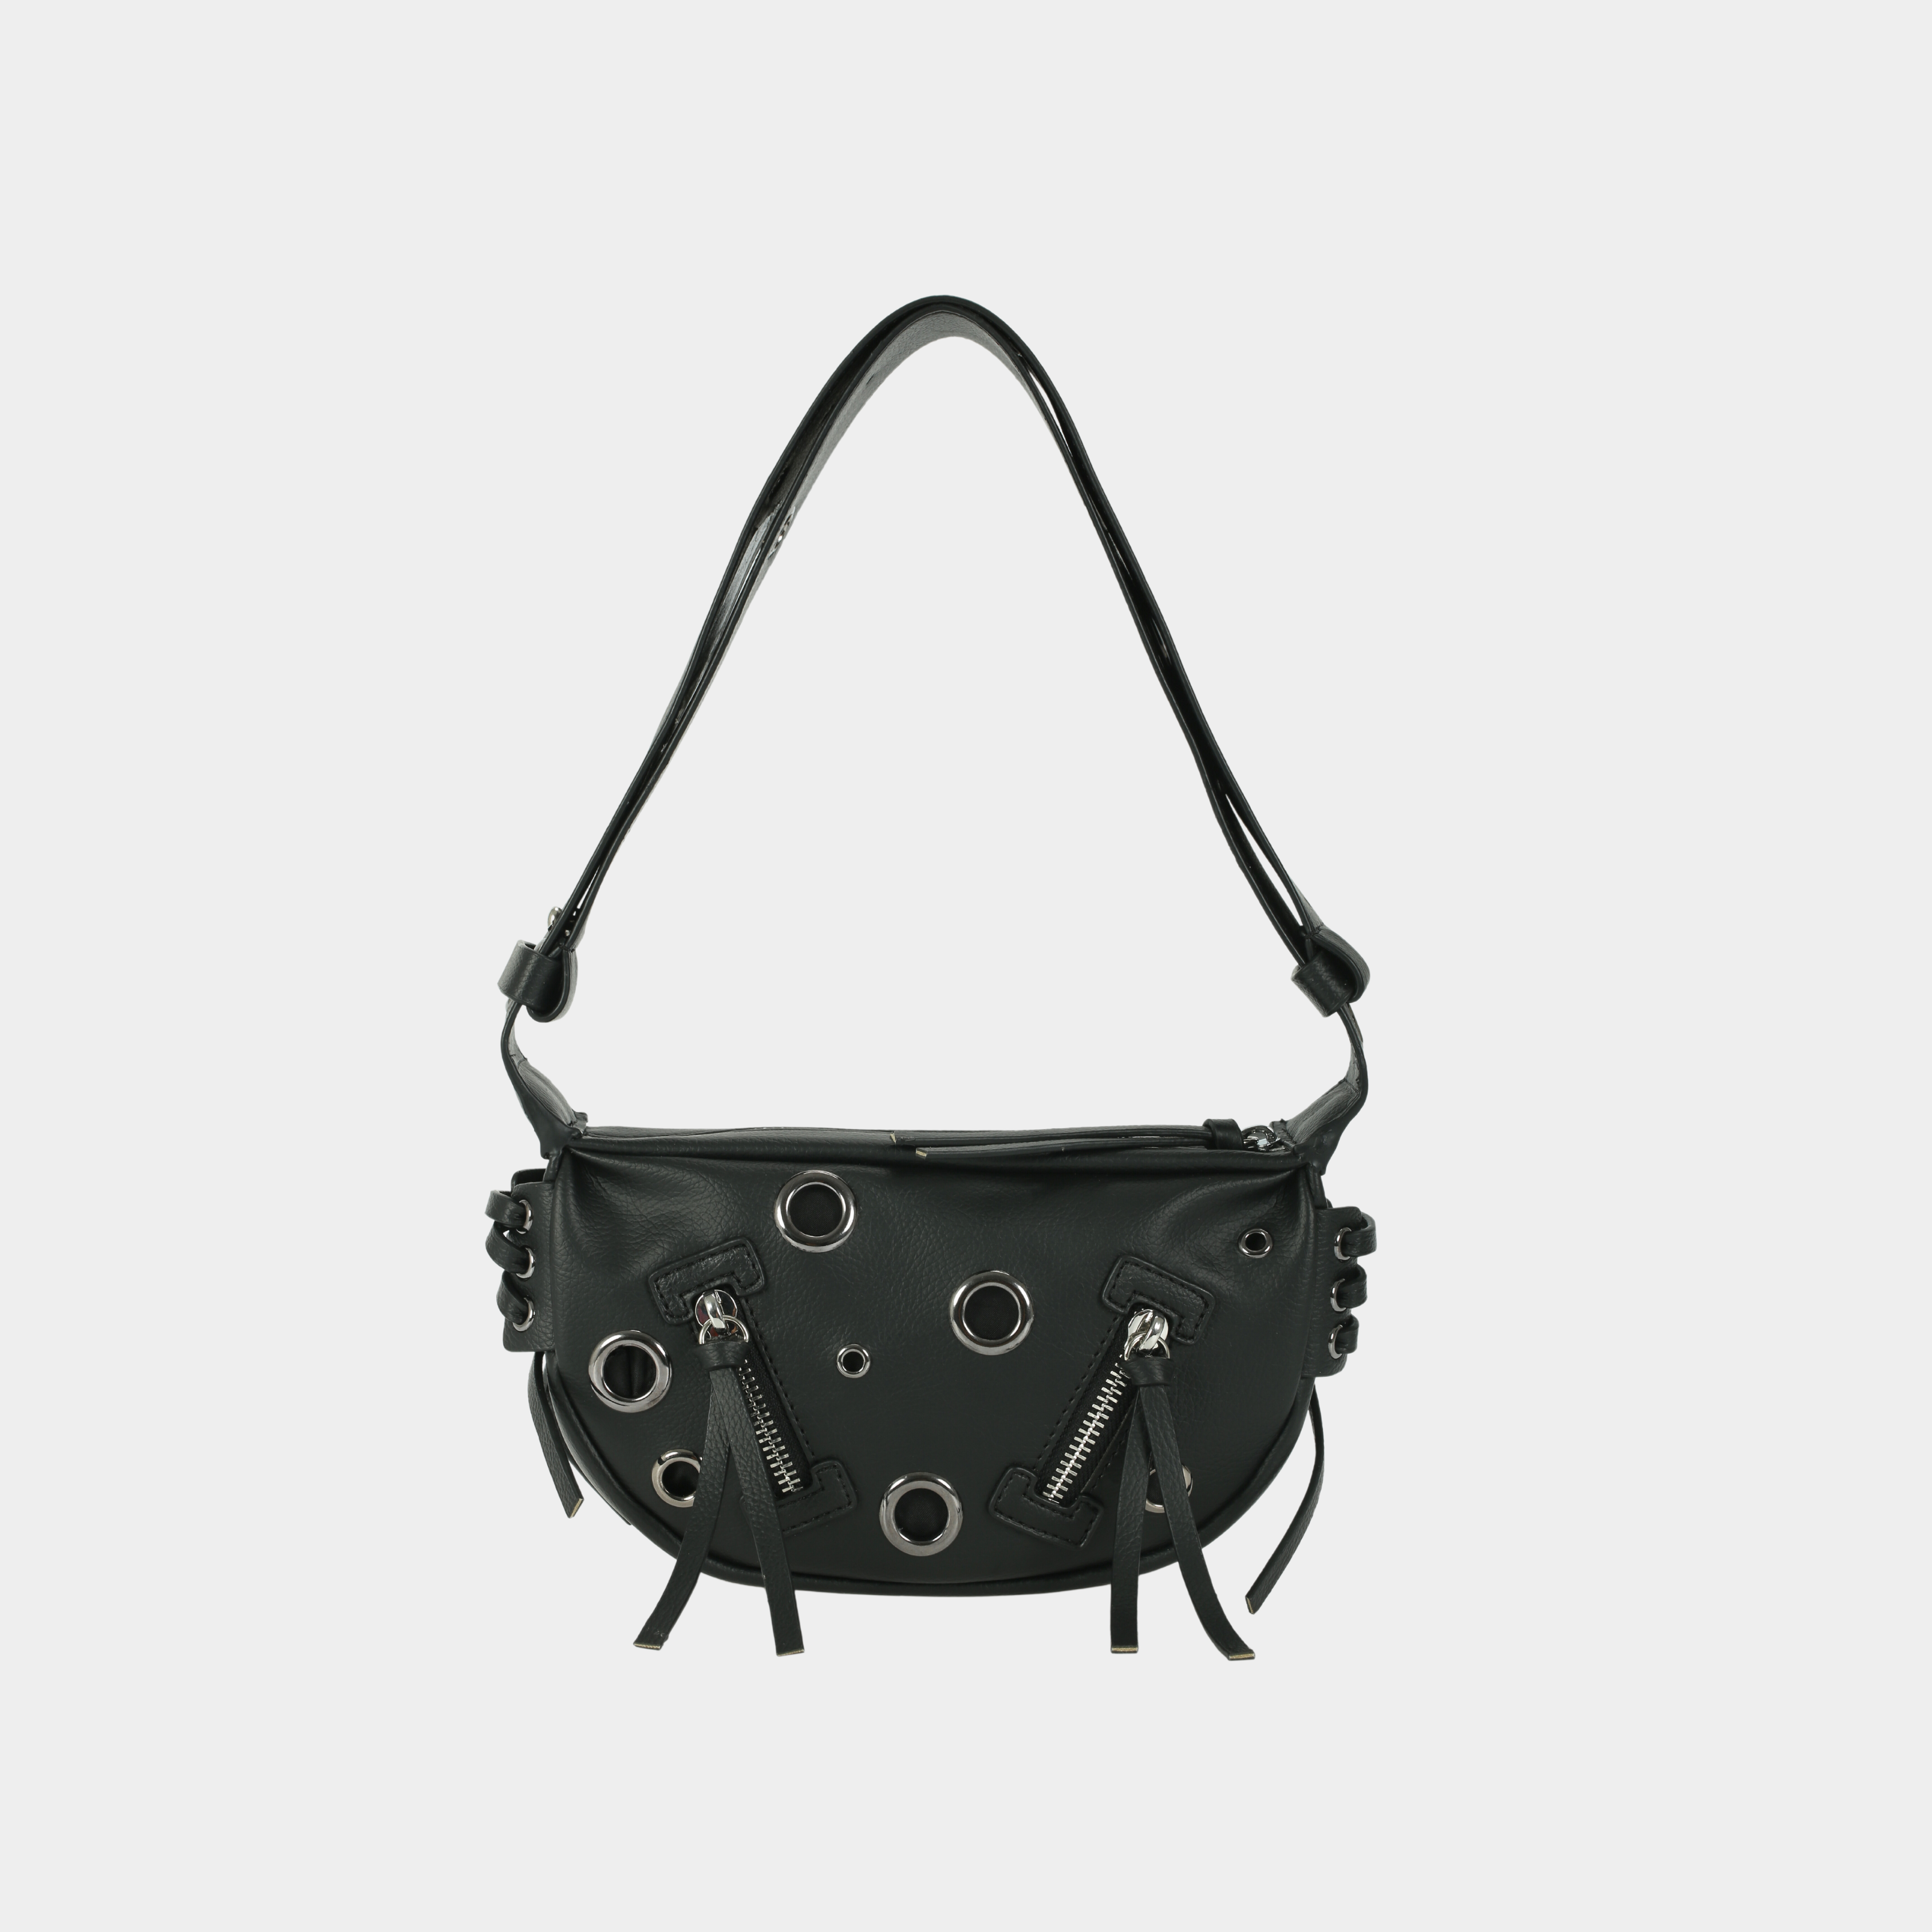 LACE EYELET BAG small size (S) black color